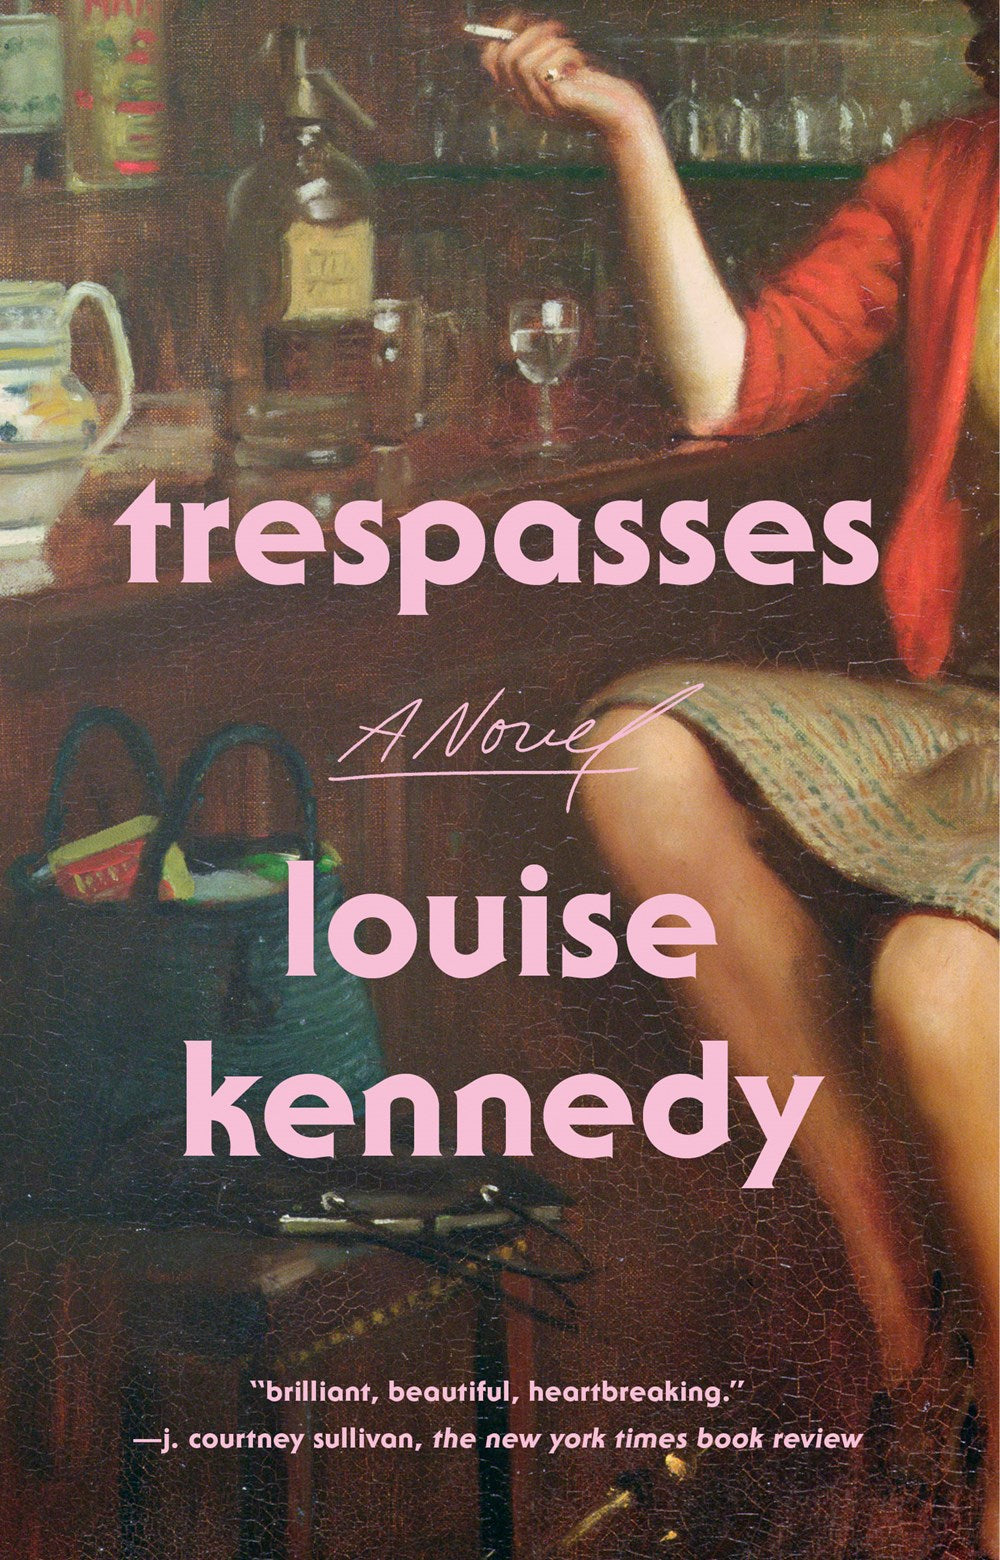 Trespasses: A Novel by Louise Kennedy